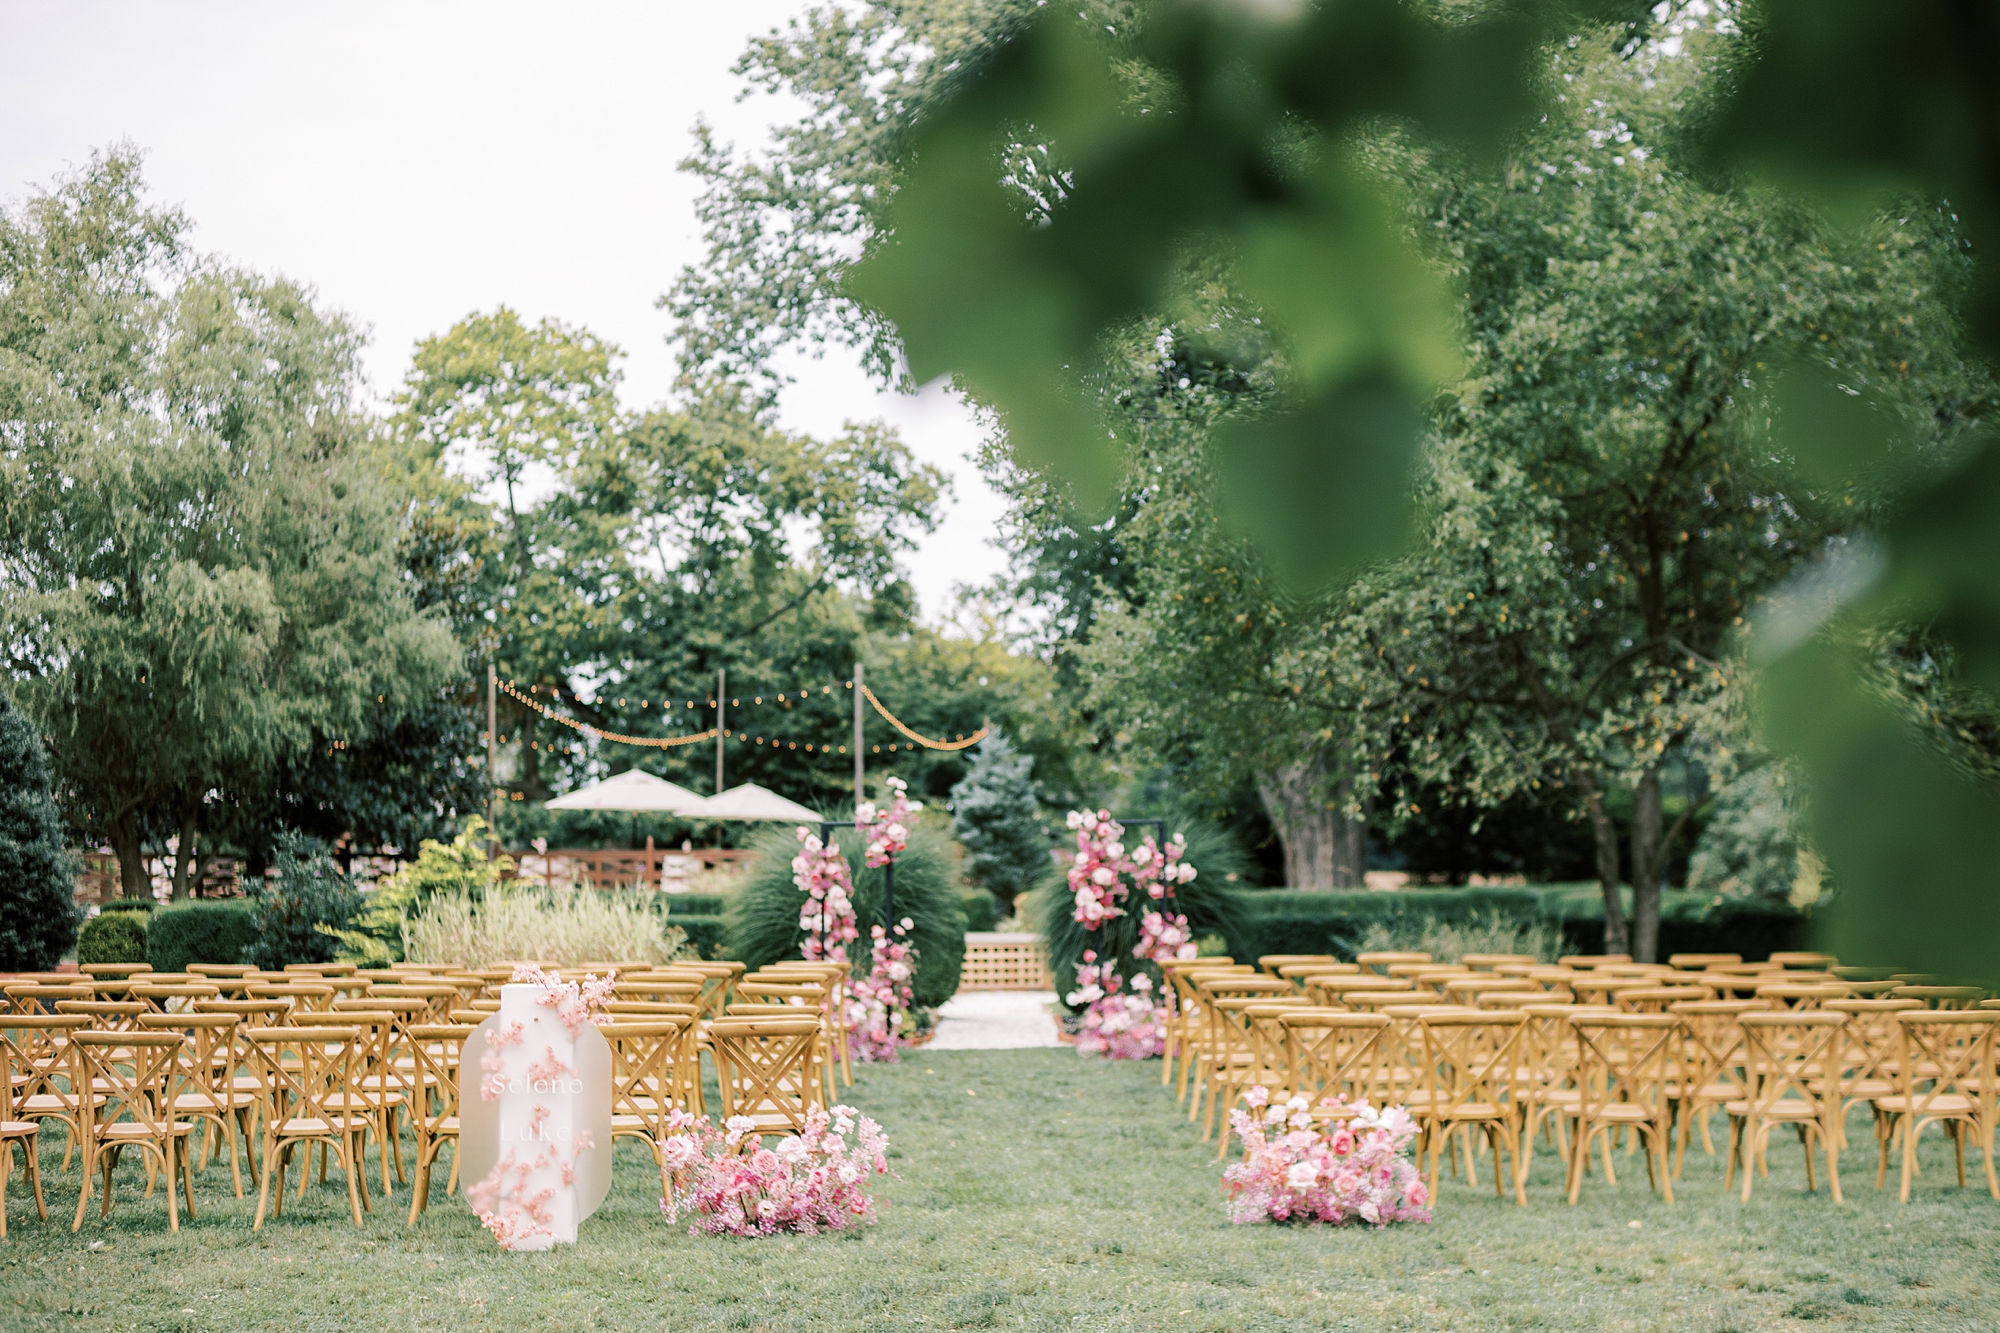 ceremony site on lawn at The Cypress House with monochromatic pink flowers